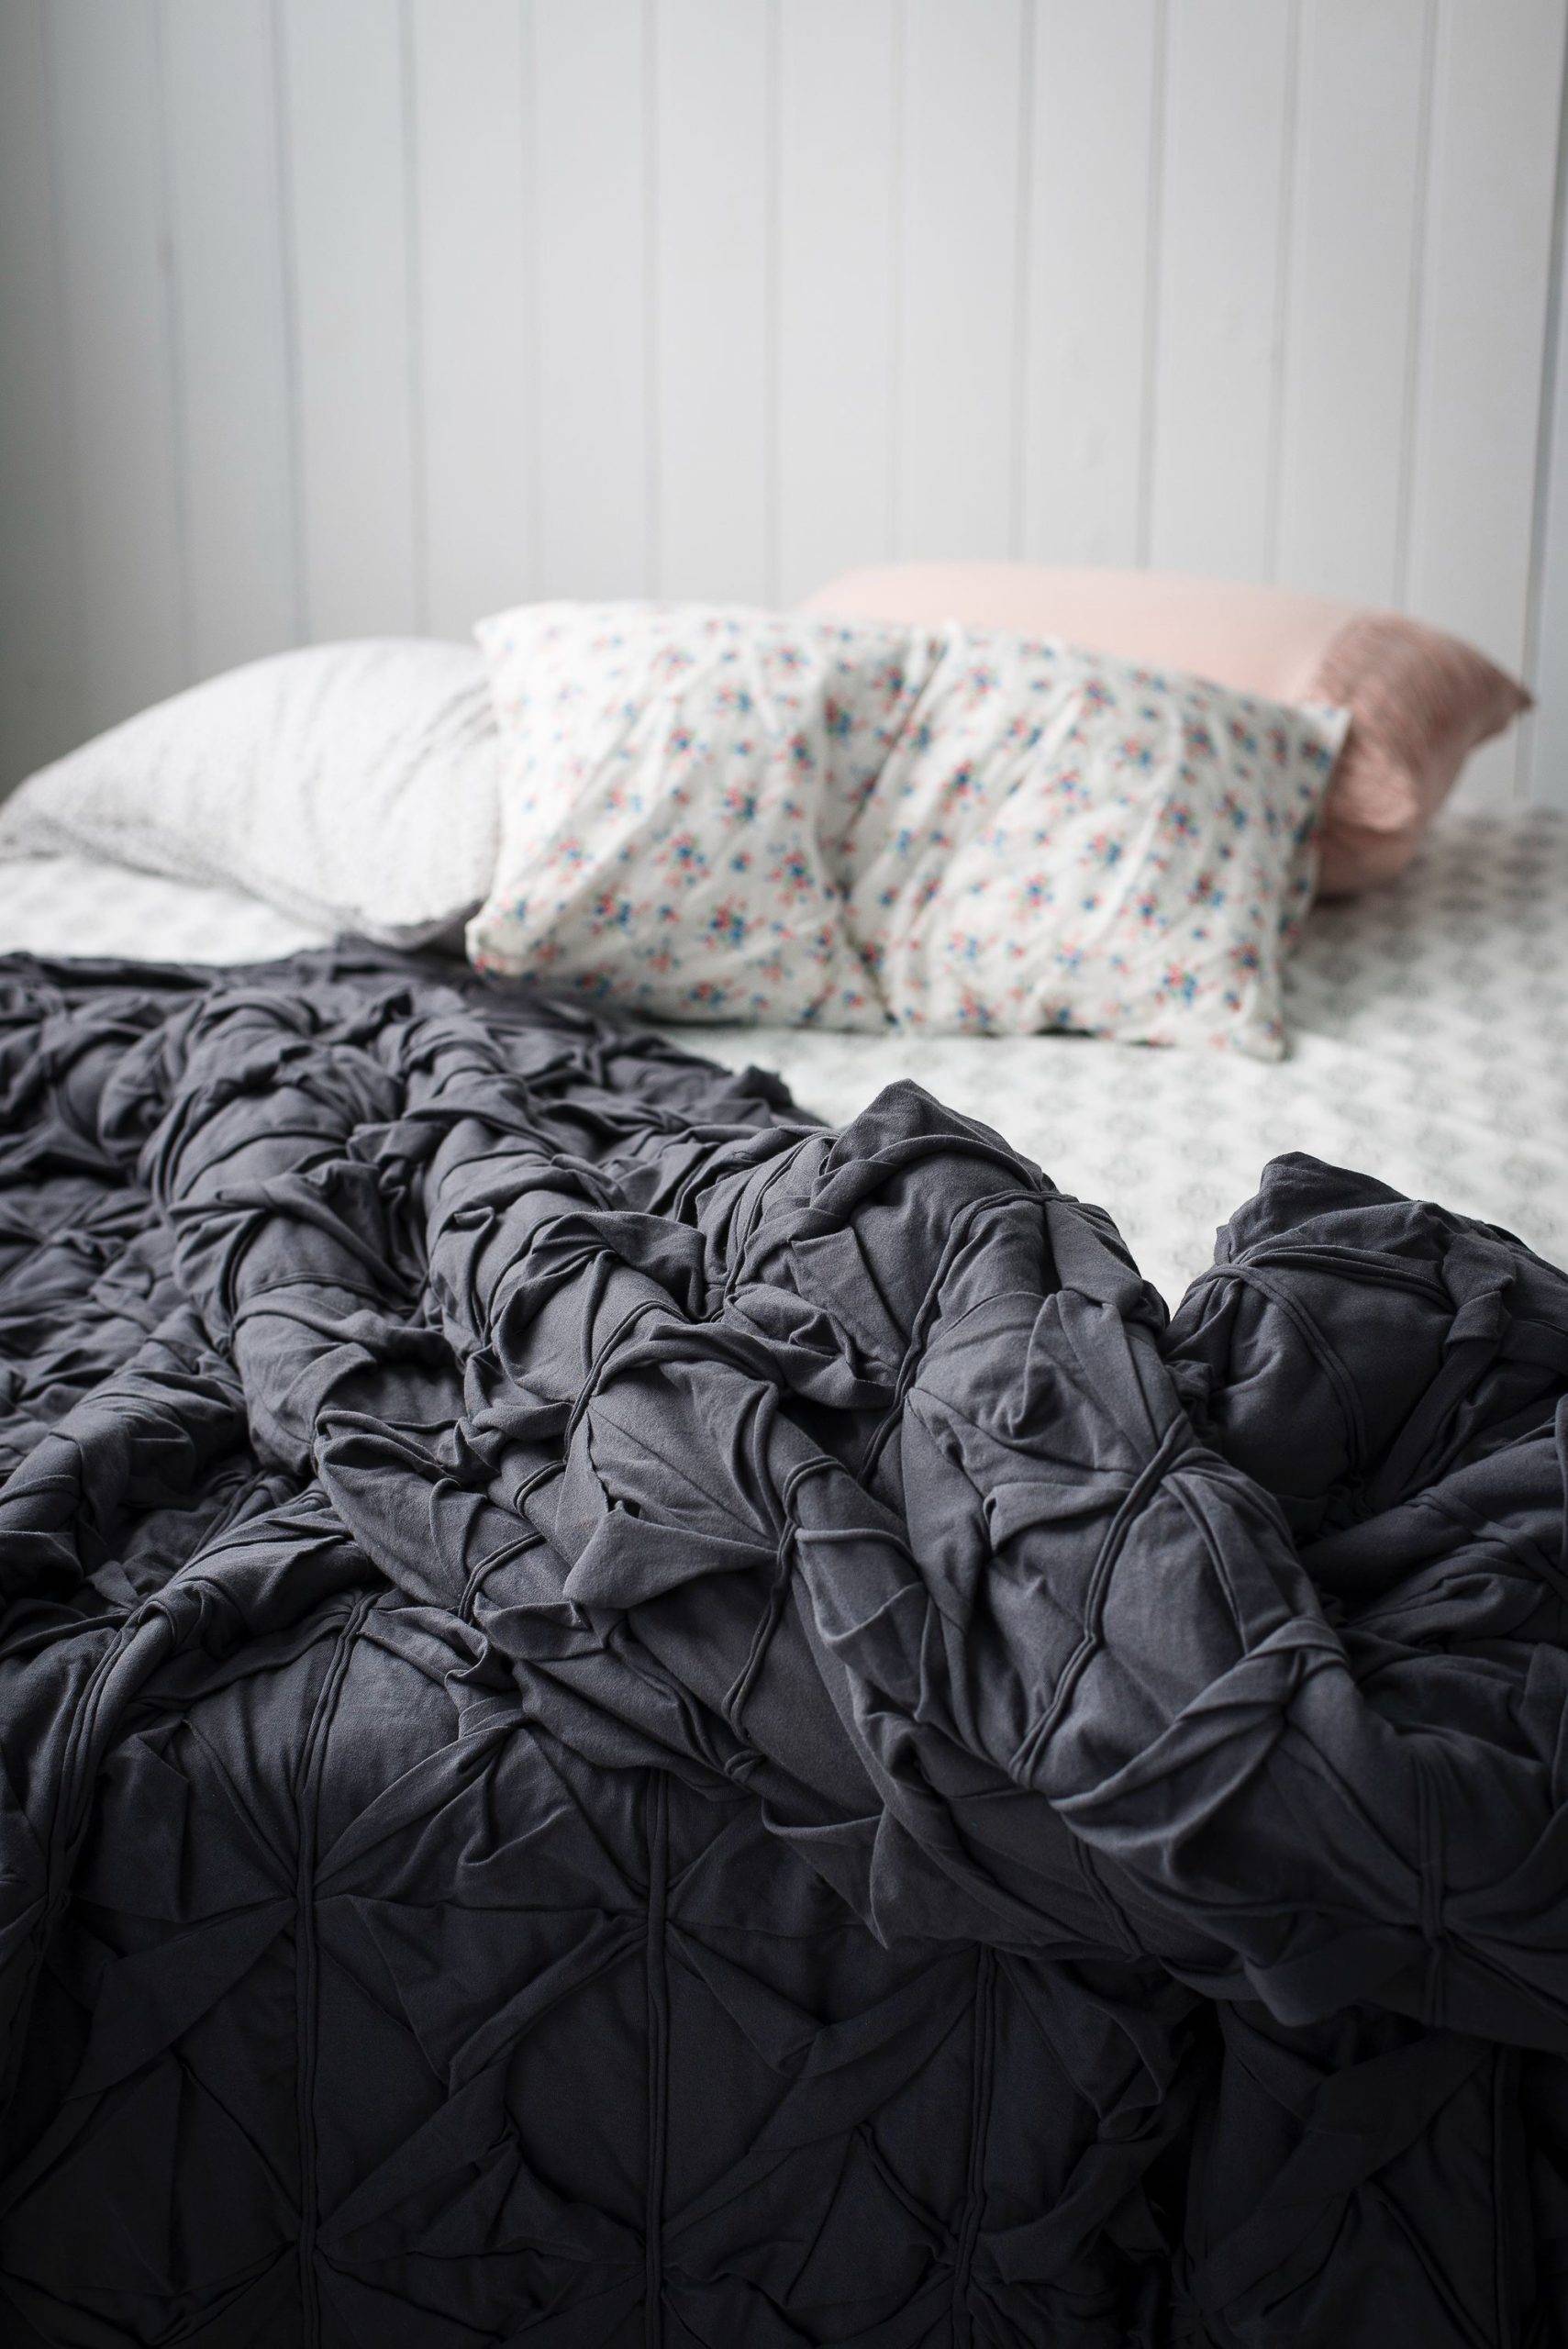 Bed with crumpled duvet